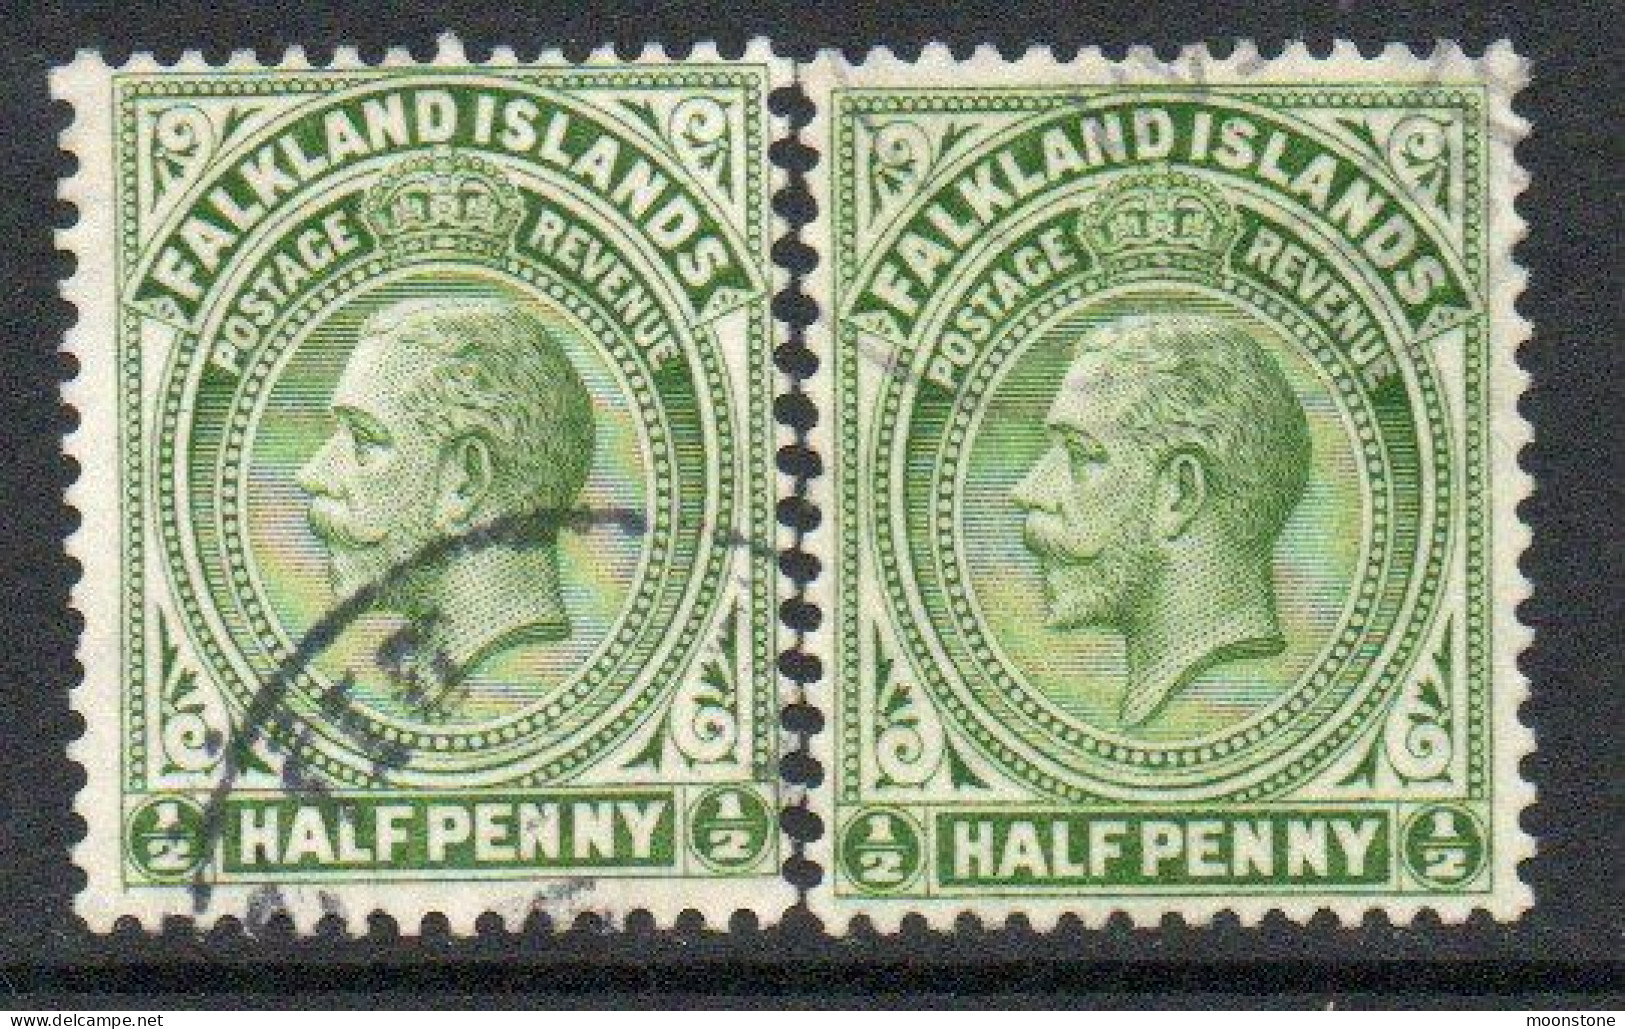 Falkland Islands GV 1912-20 ½d Yellow-green Definitive, Comb Perf, Wmk. Multiple Crown CA, 2x Shades, Used, SG 60 - Falkland